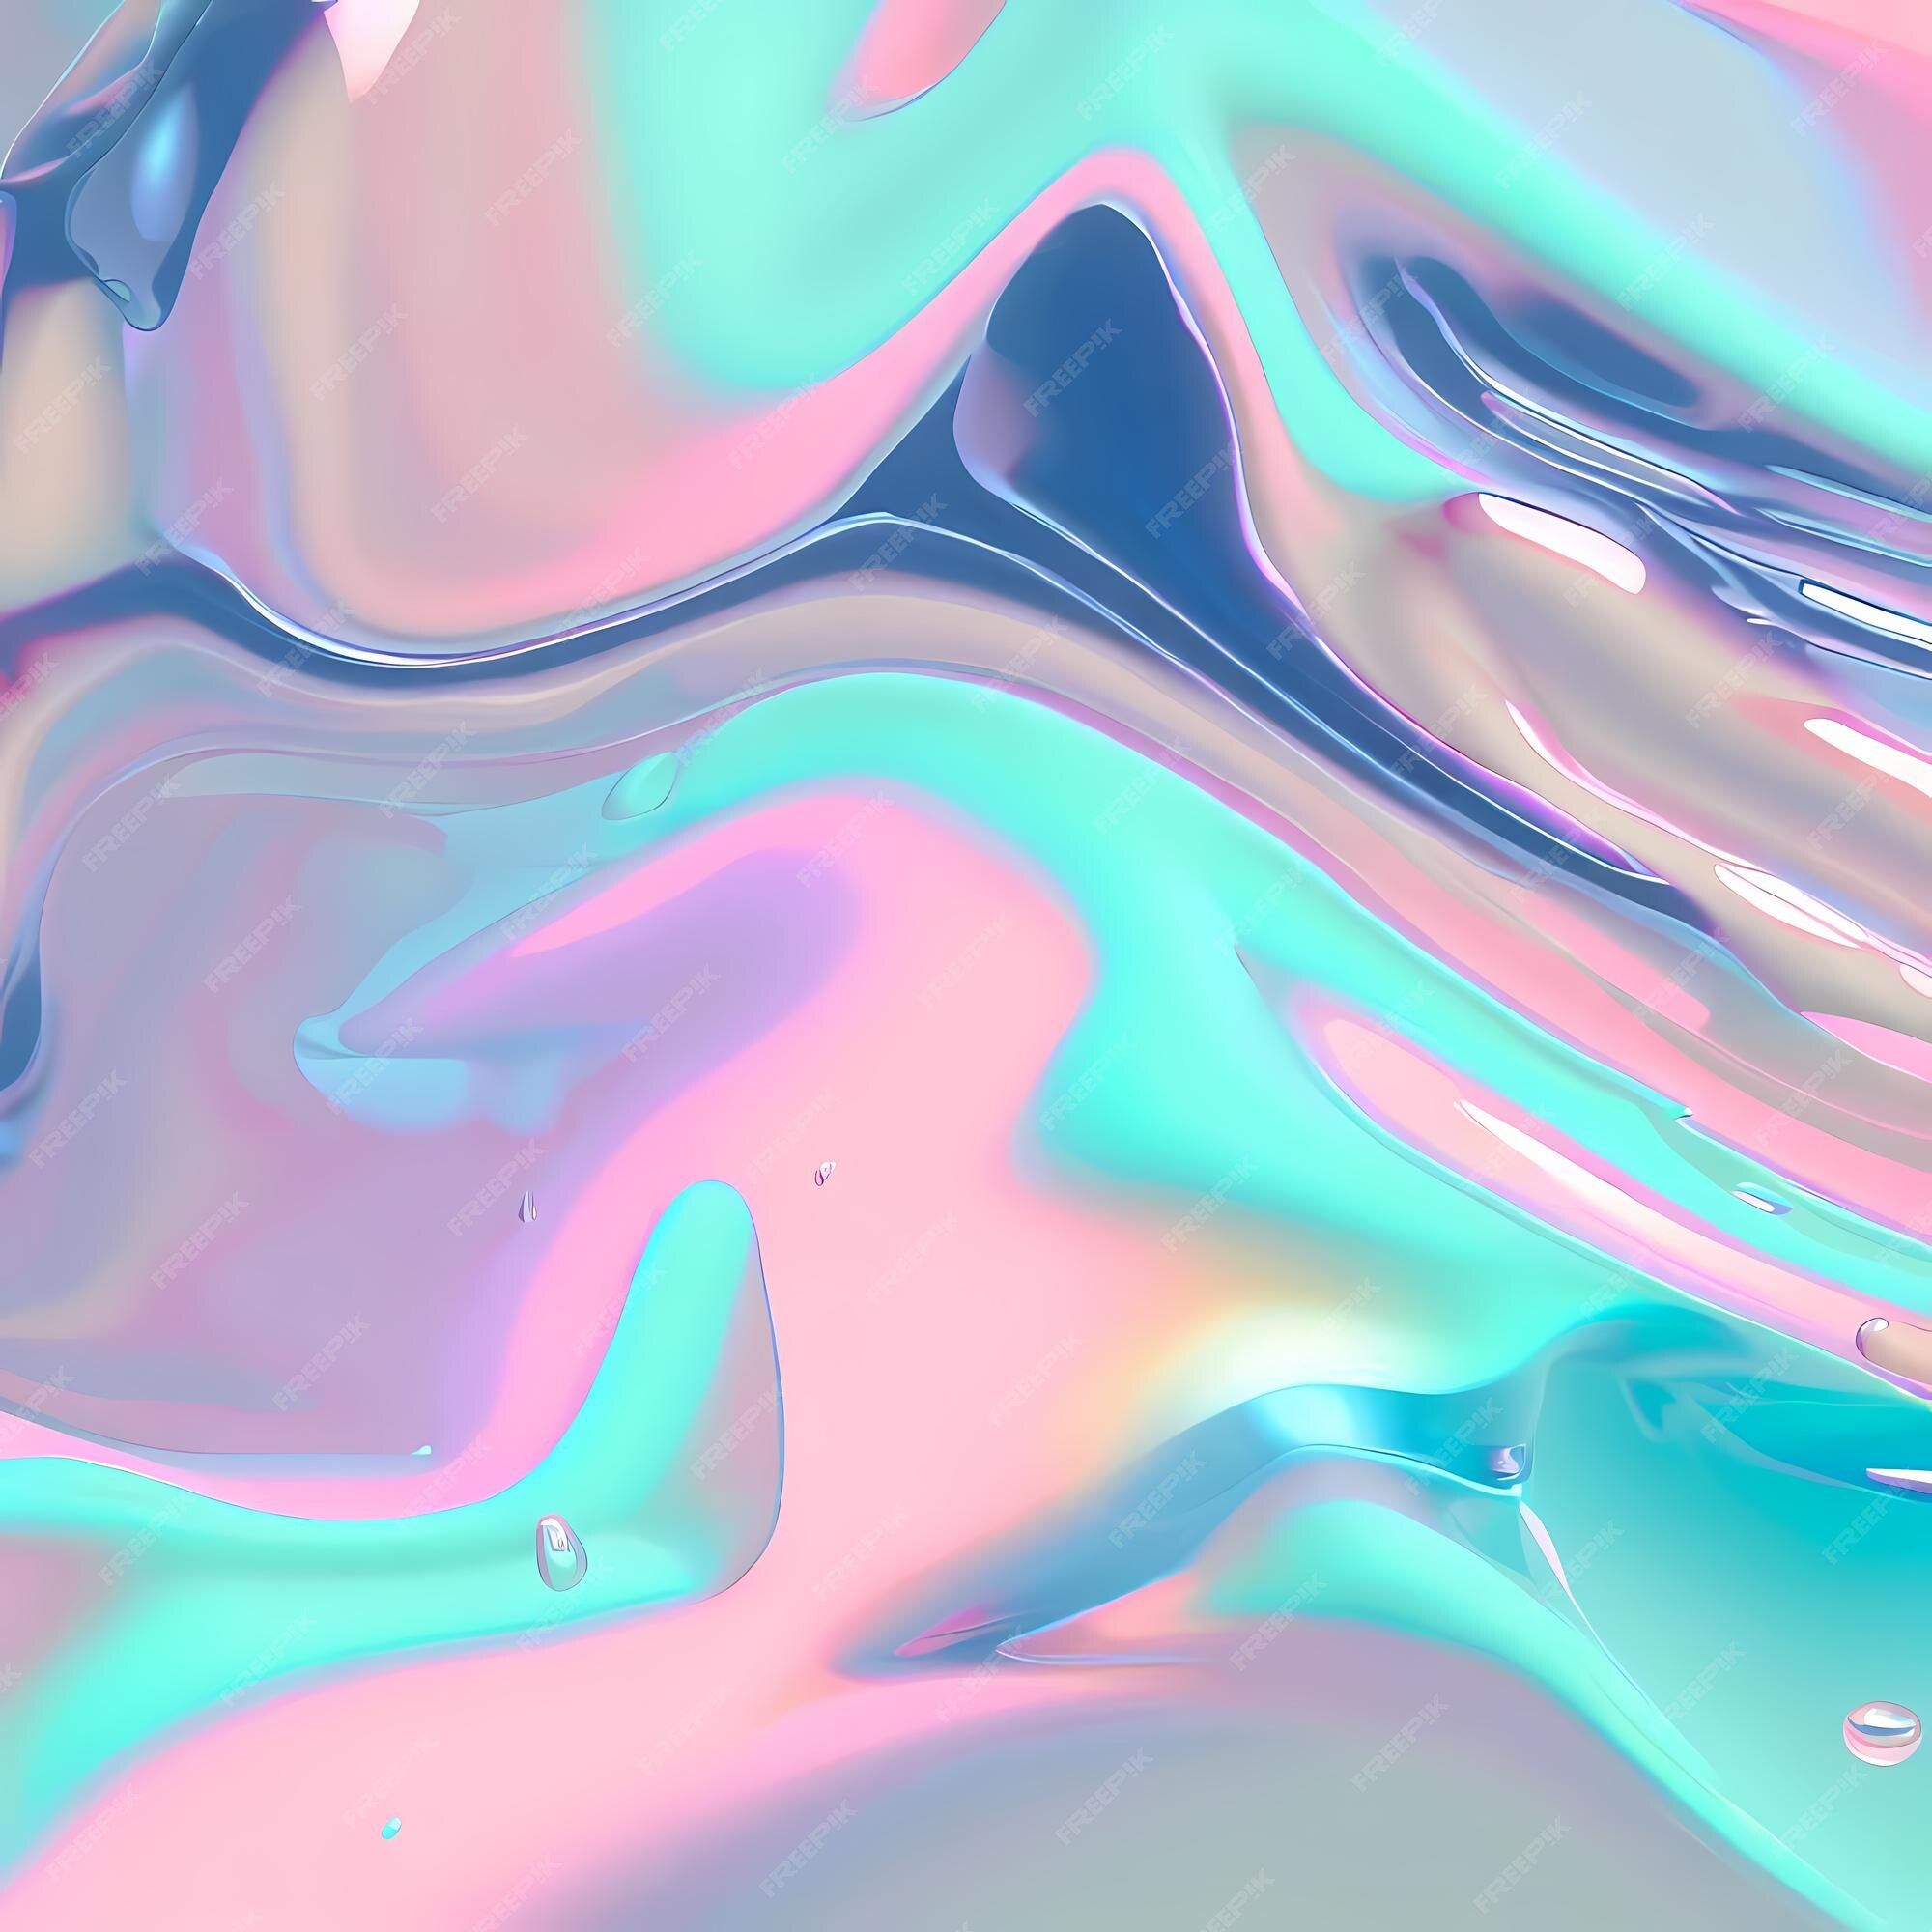 An abstract image of iridescent liquid with a pastel color scheme - Holographic, iridescent